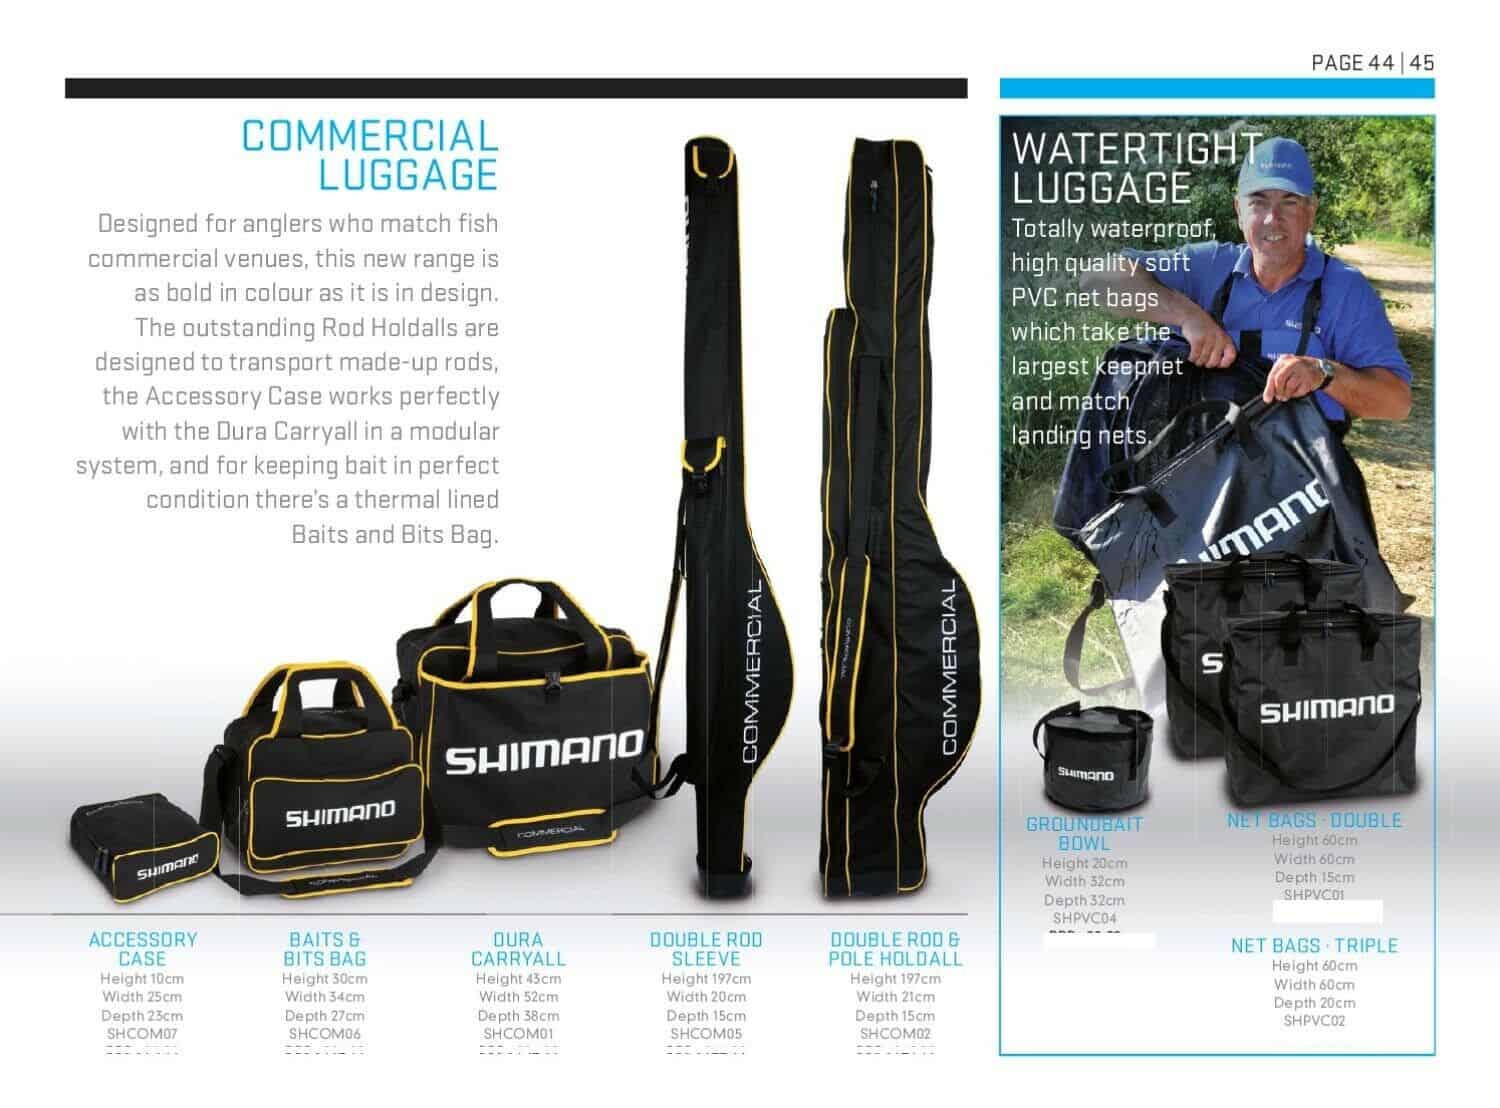 Shimano Commercial Luggage & Accessories Match - Coarse Fishing